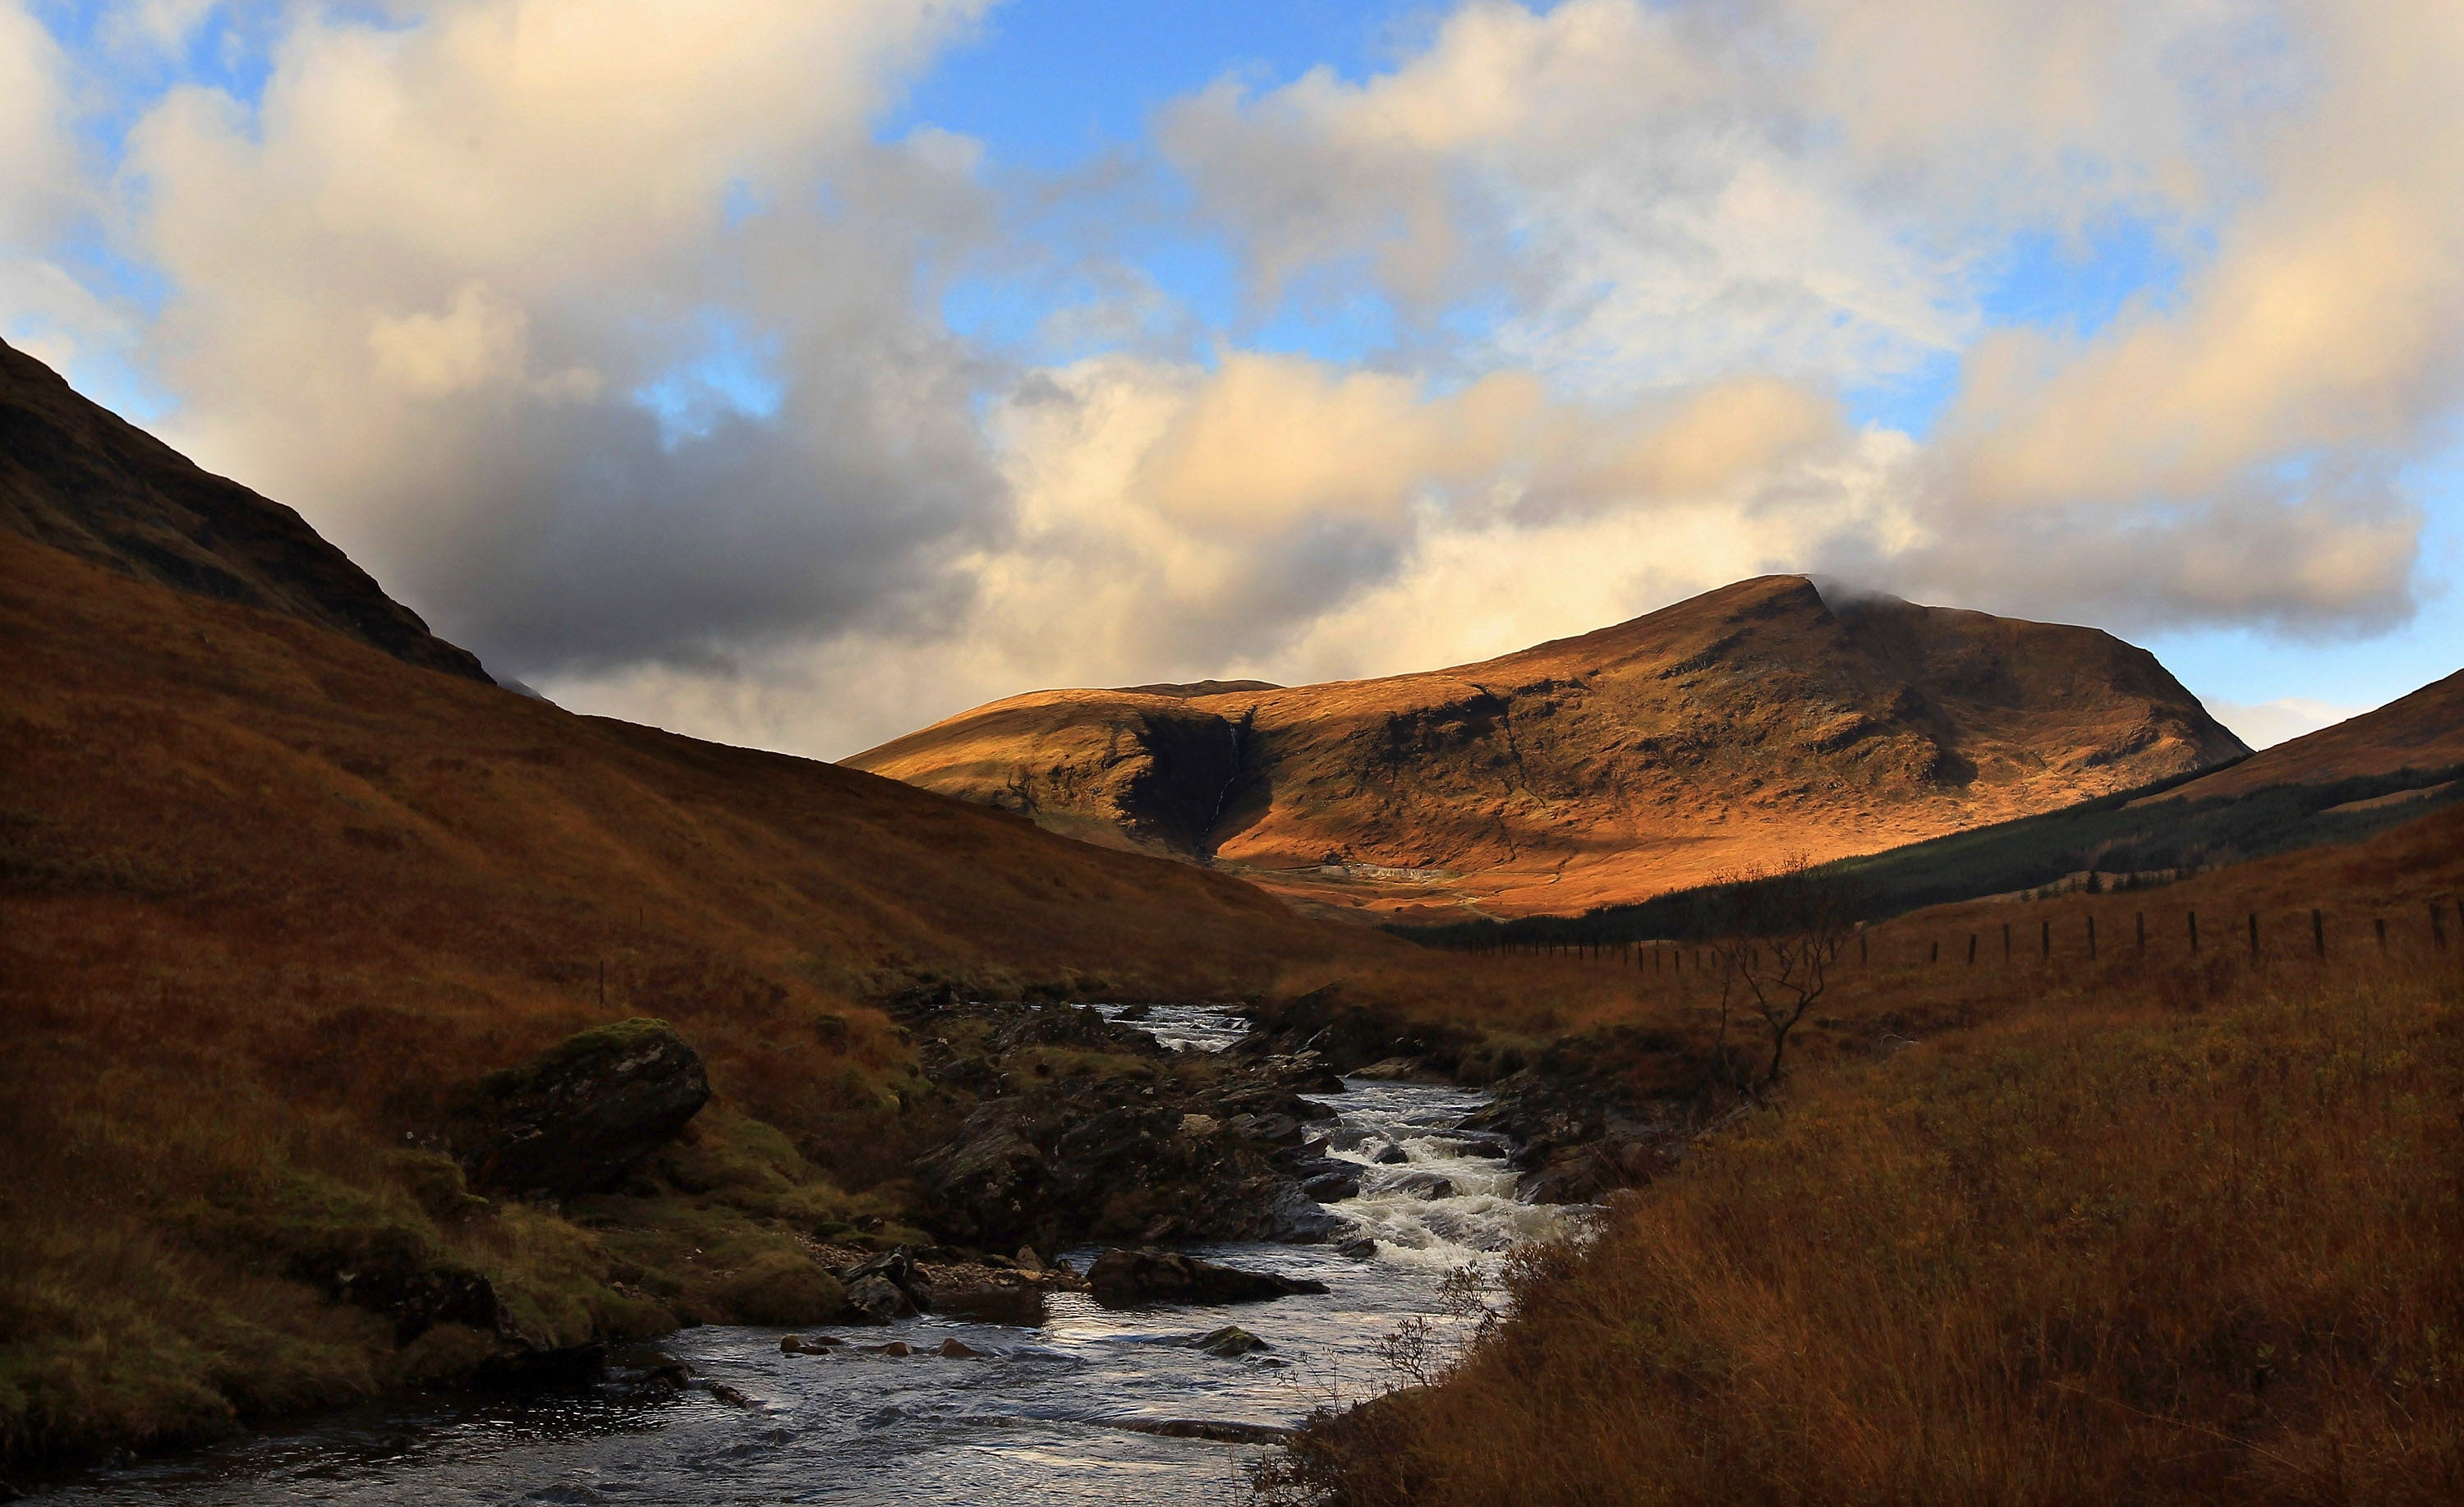 Plans have been approved for the mine to be built near Glen Cononish